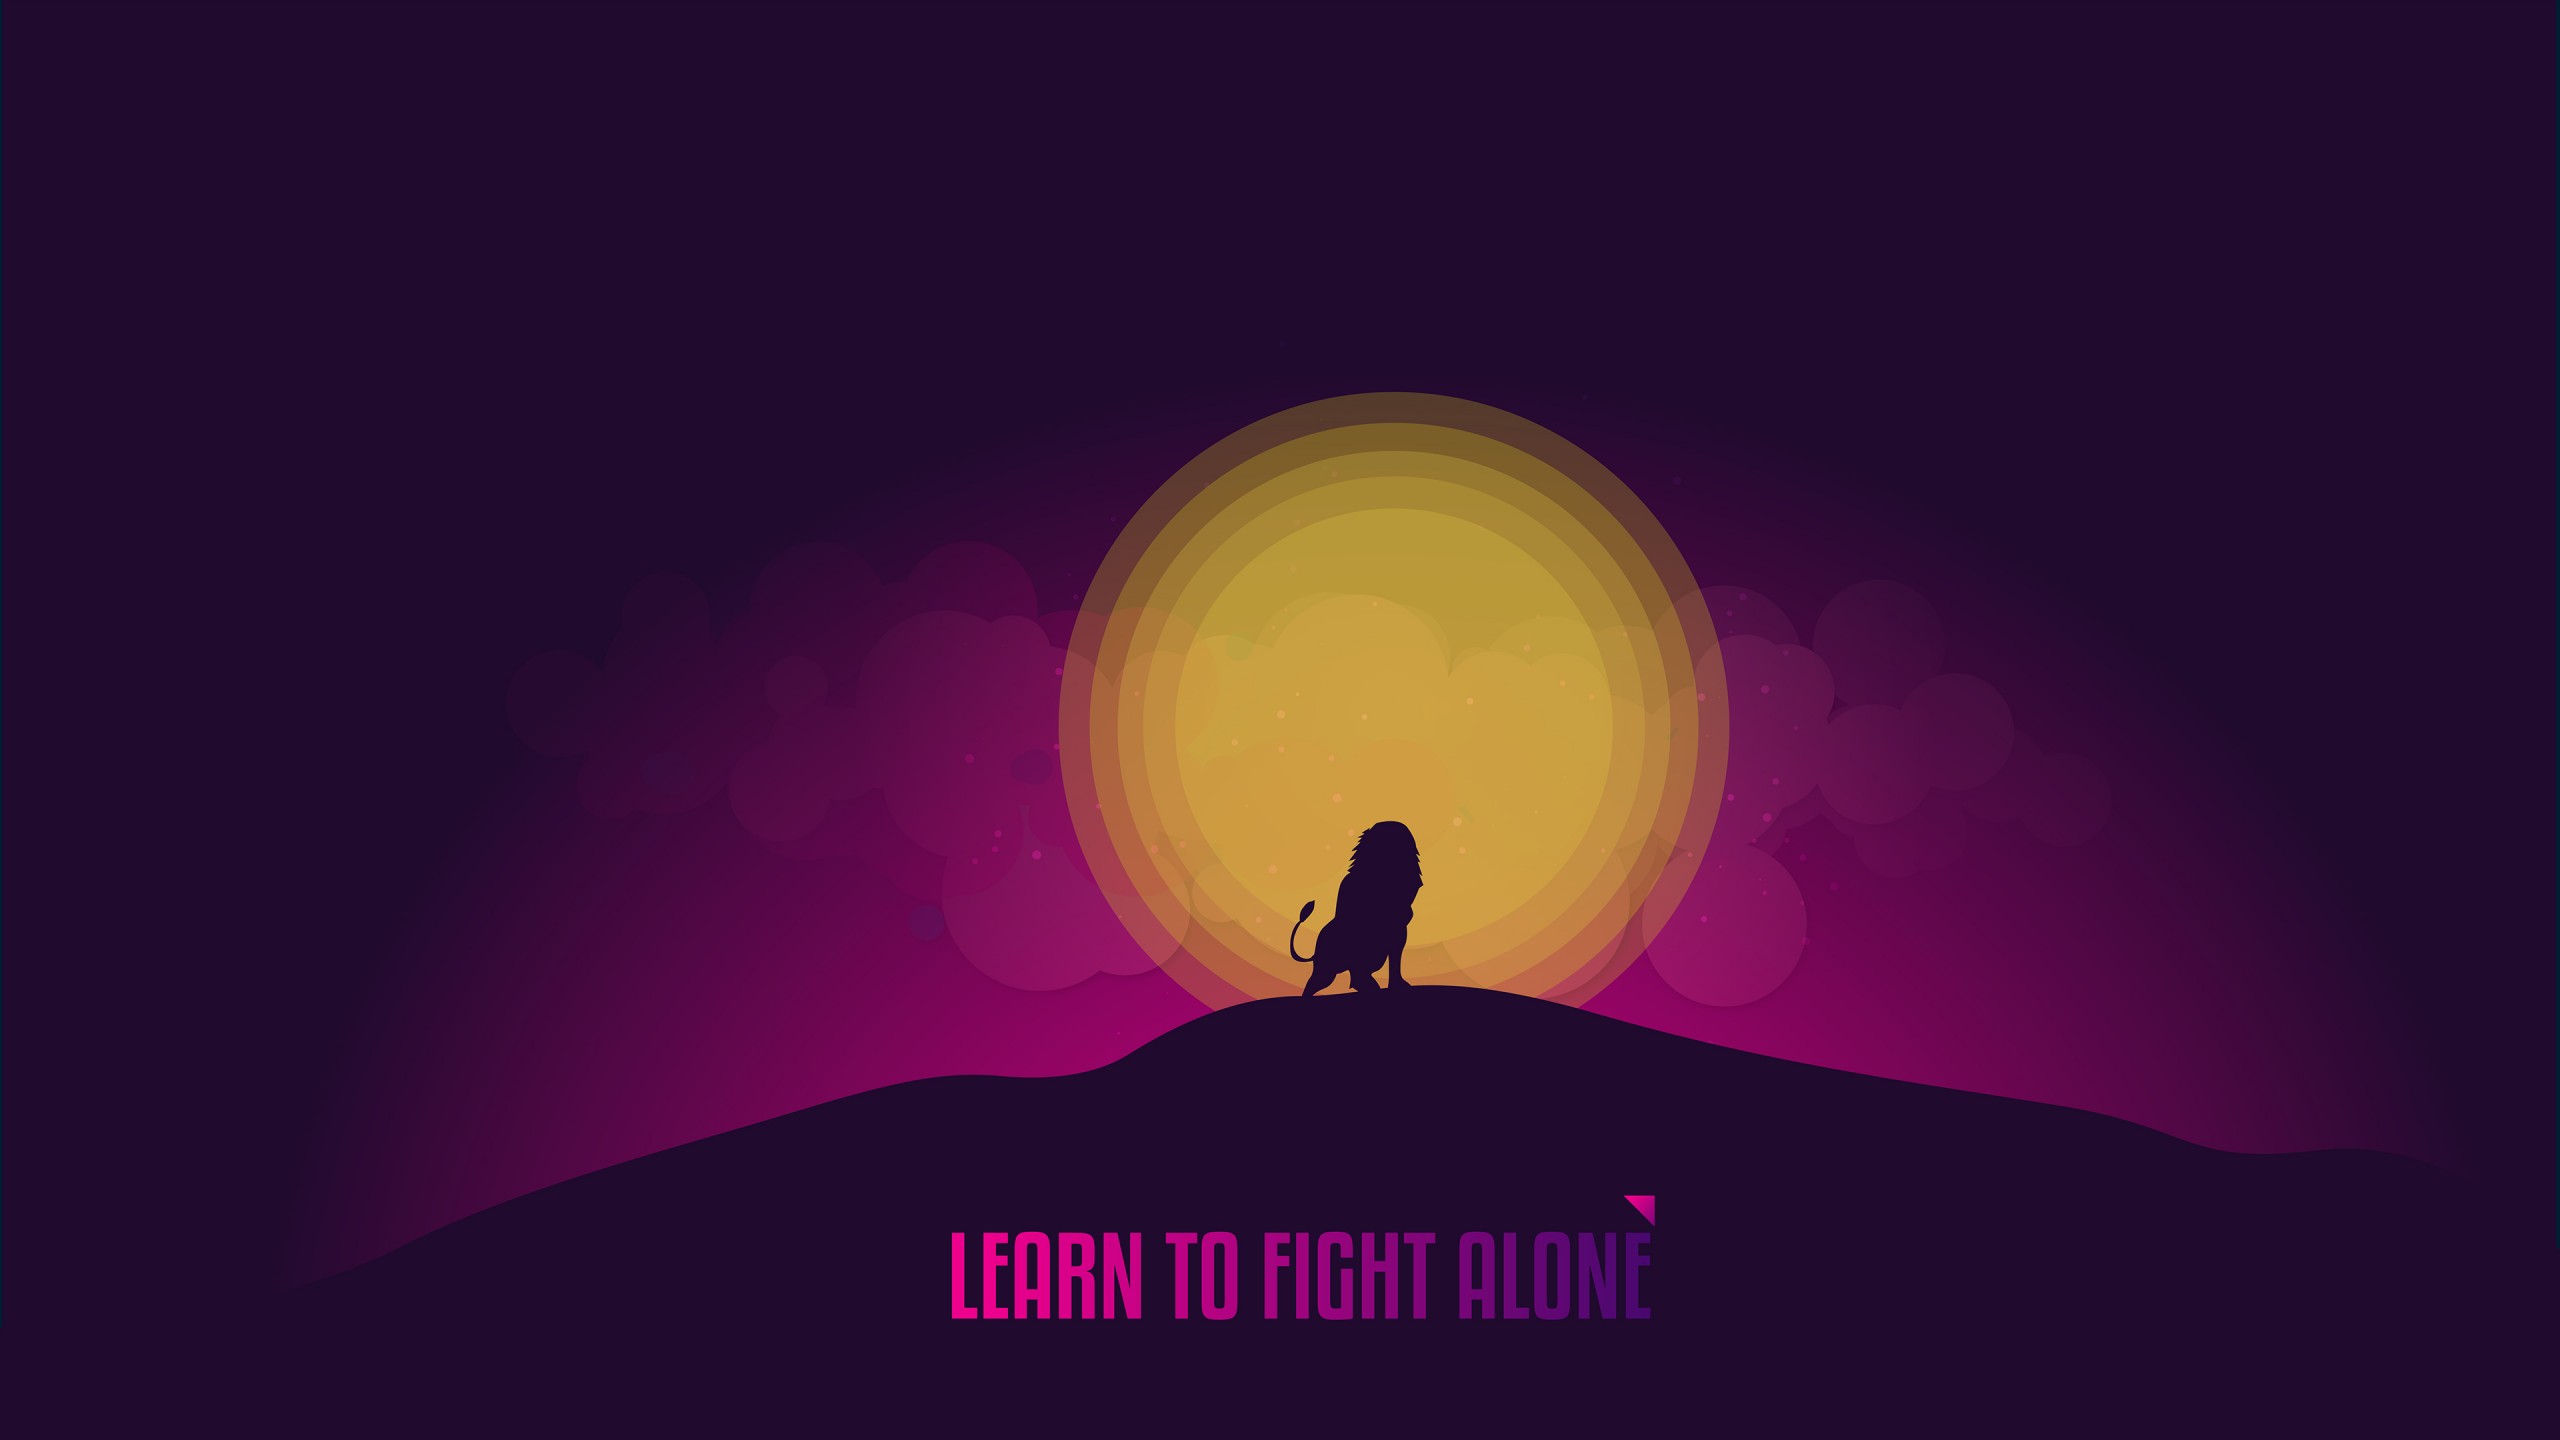 720x1280 hd wallpapers quotes,purple,sky,violet,illustration,cartoon